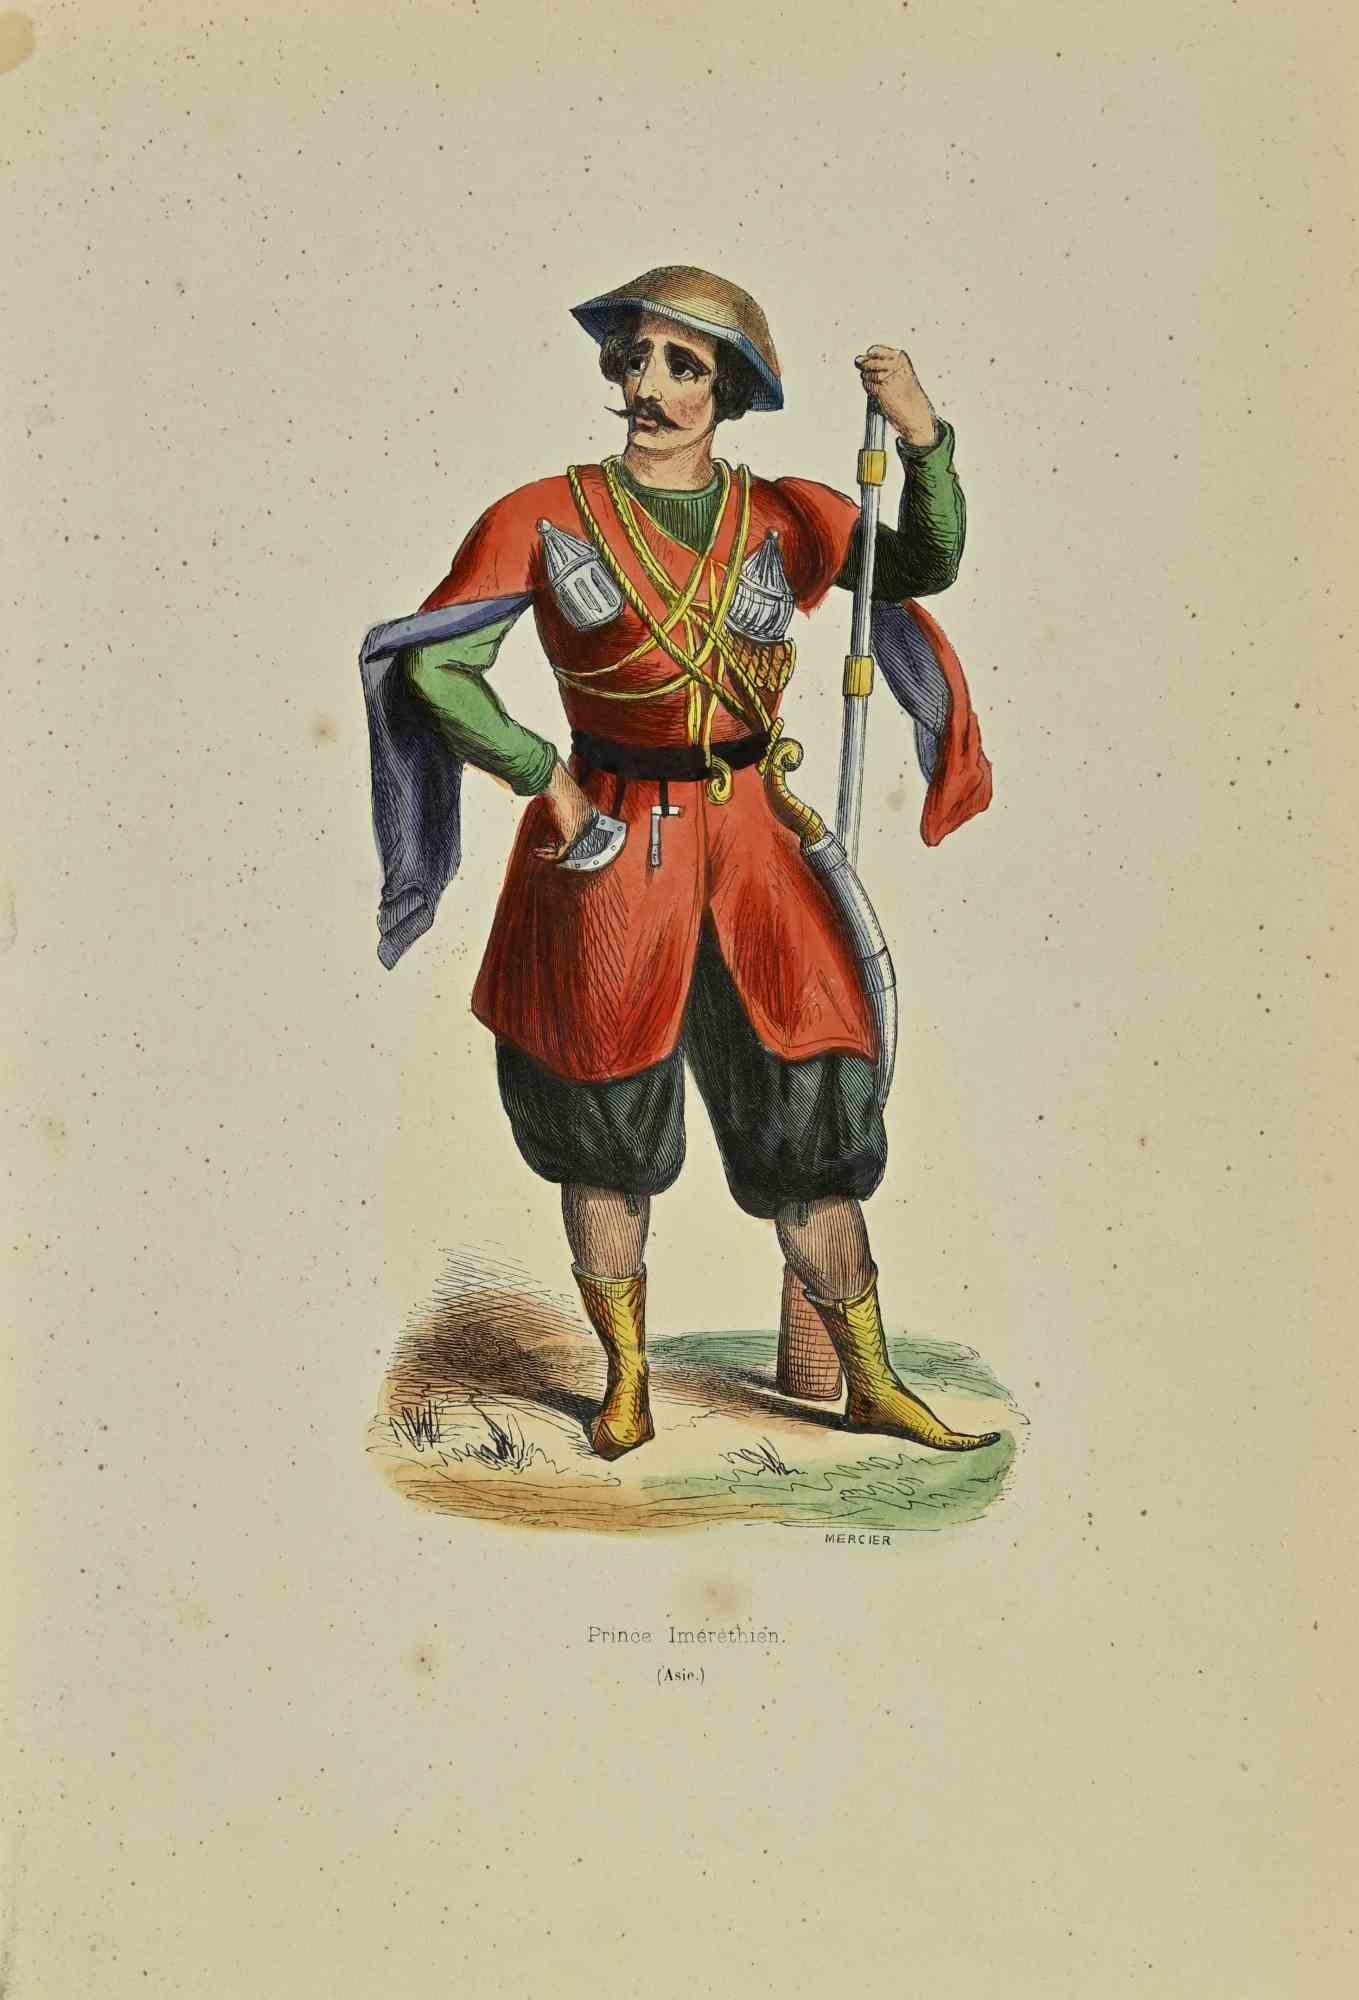 Imerethian Prince is a lithograph made by Auguste Wahlen in 1844.

Hand colored.

Good condition.

At the center of the artwork is the original title "Imerethian Prince".

The work is part of Suite Moeurs, usages et costumes de tous les peuples du